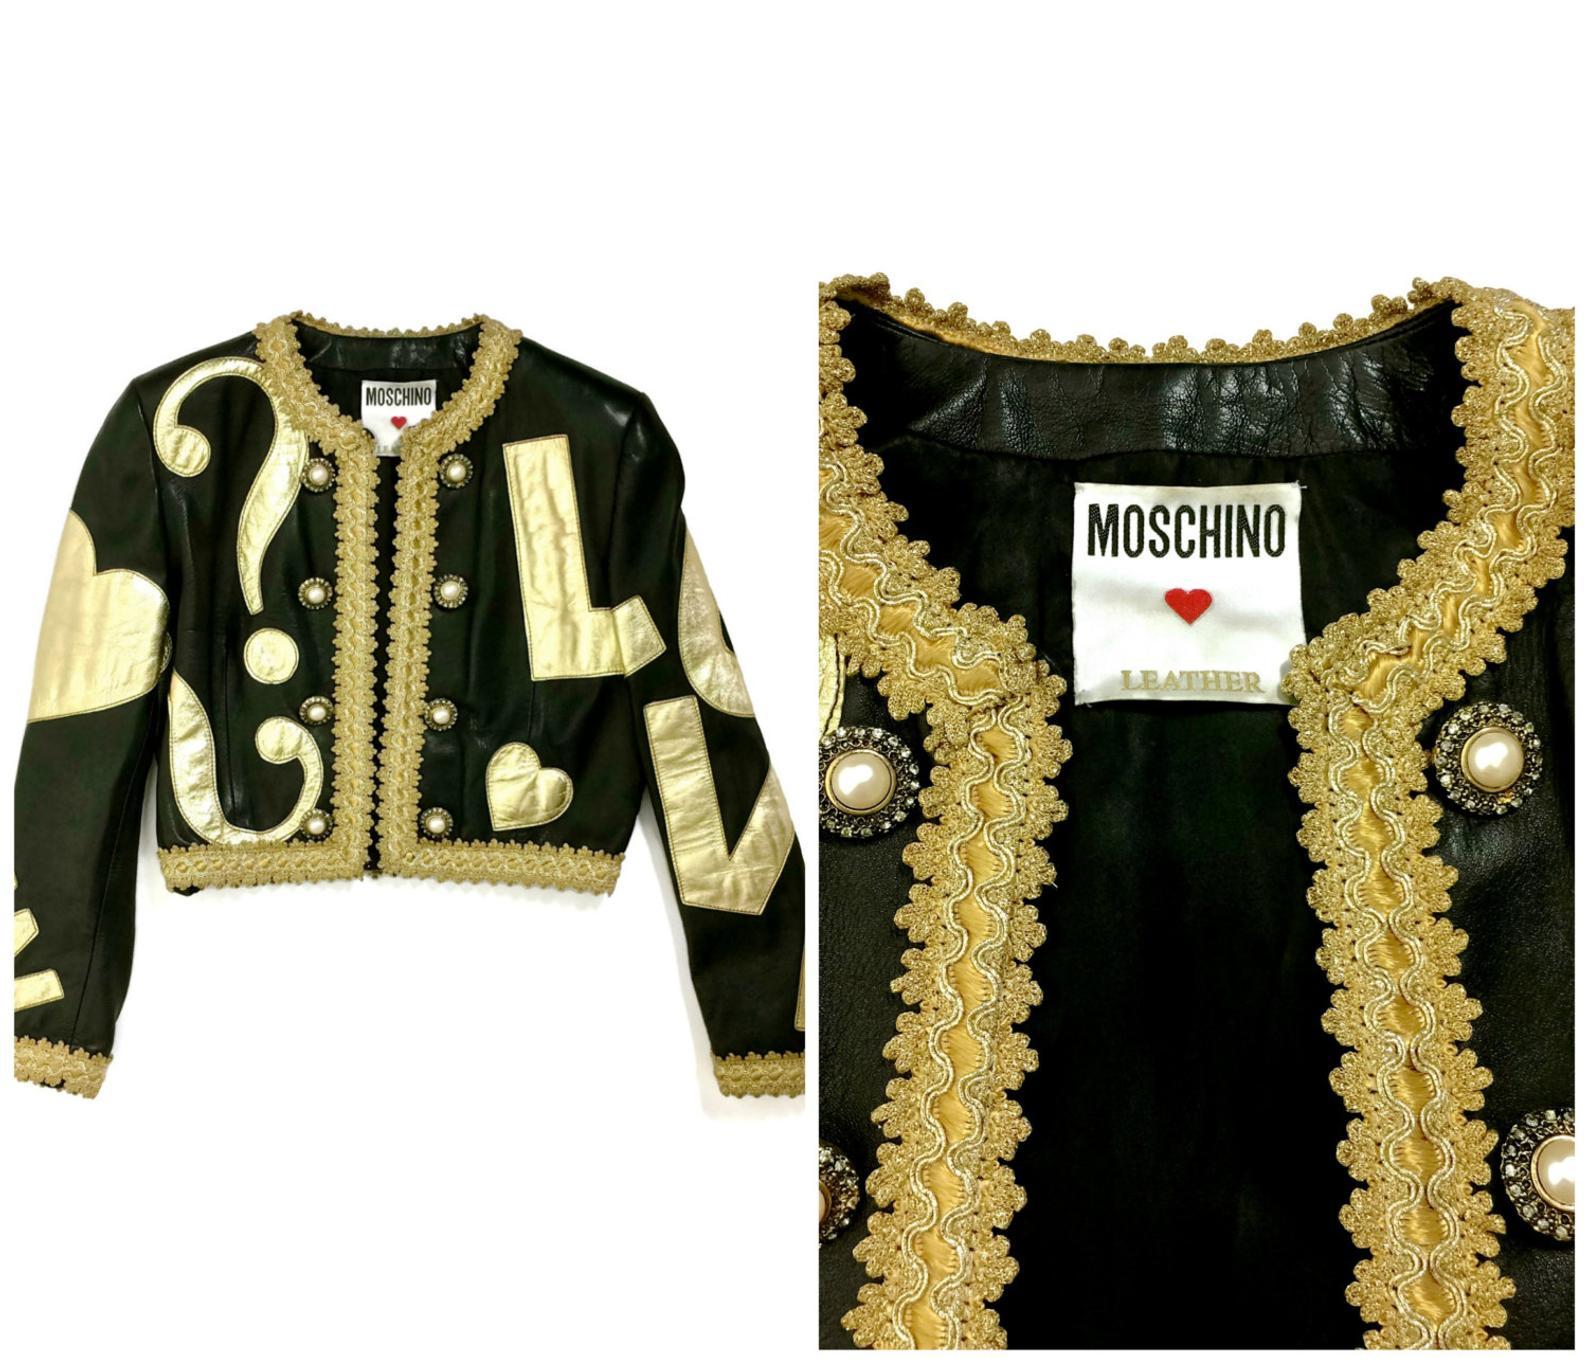 Vintage MOSCHINO PEACE and LOVE Passementerie Metallic Trim Black Gold Leather Jacket

Measurements taken laid flat, please double bust and waist:
Shoulder: 16 4/8 inches (41.91 cm)
Sleeves: 23 4/8 inches (59.69 cm)
Bust: 19 inches (48.26 cm) open